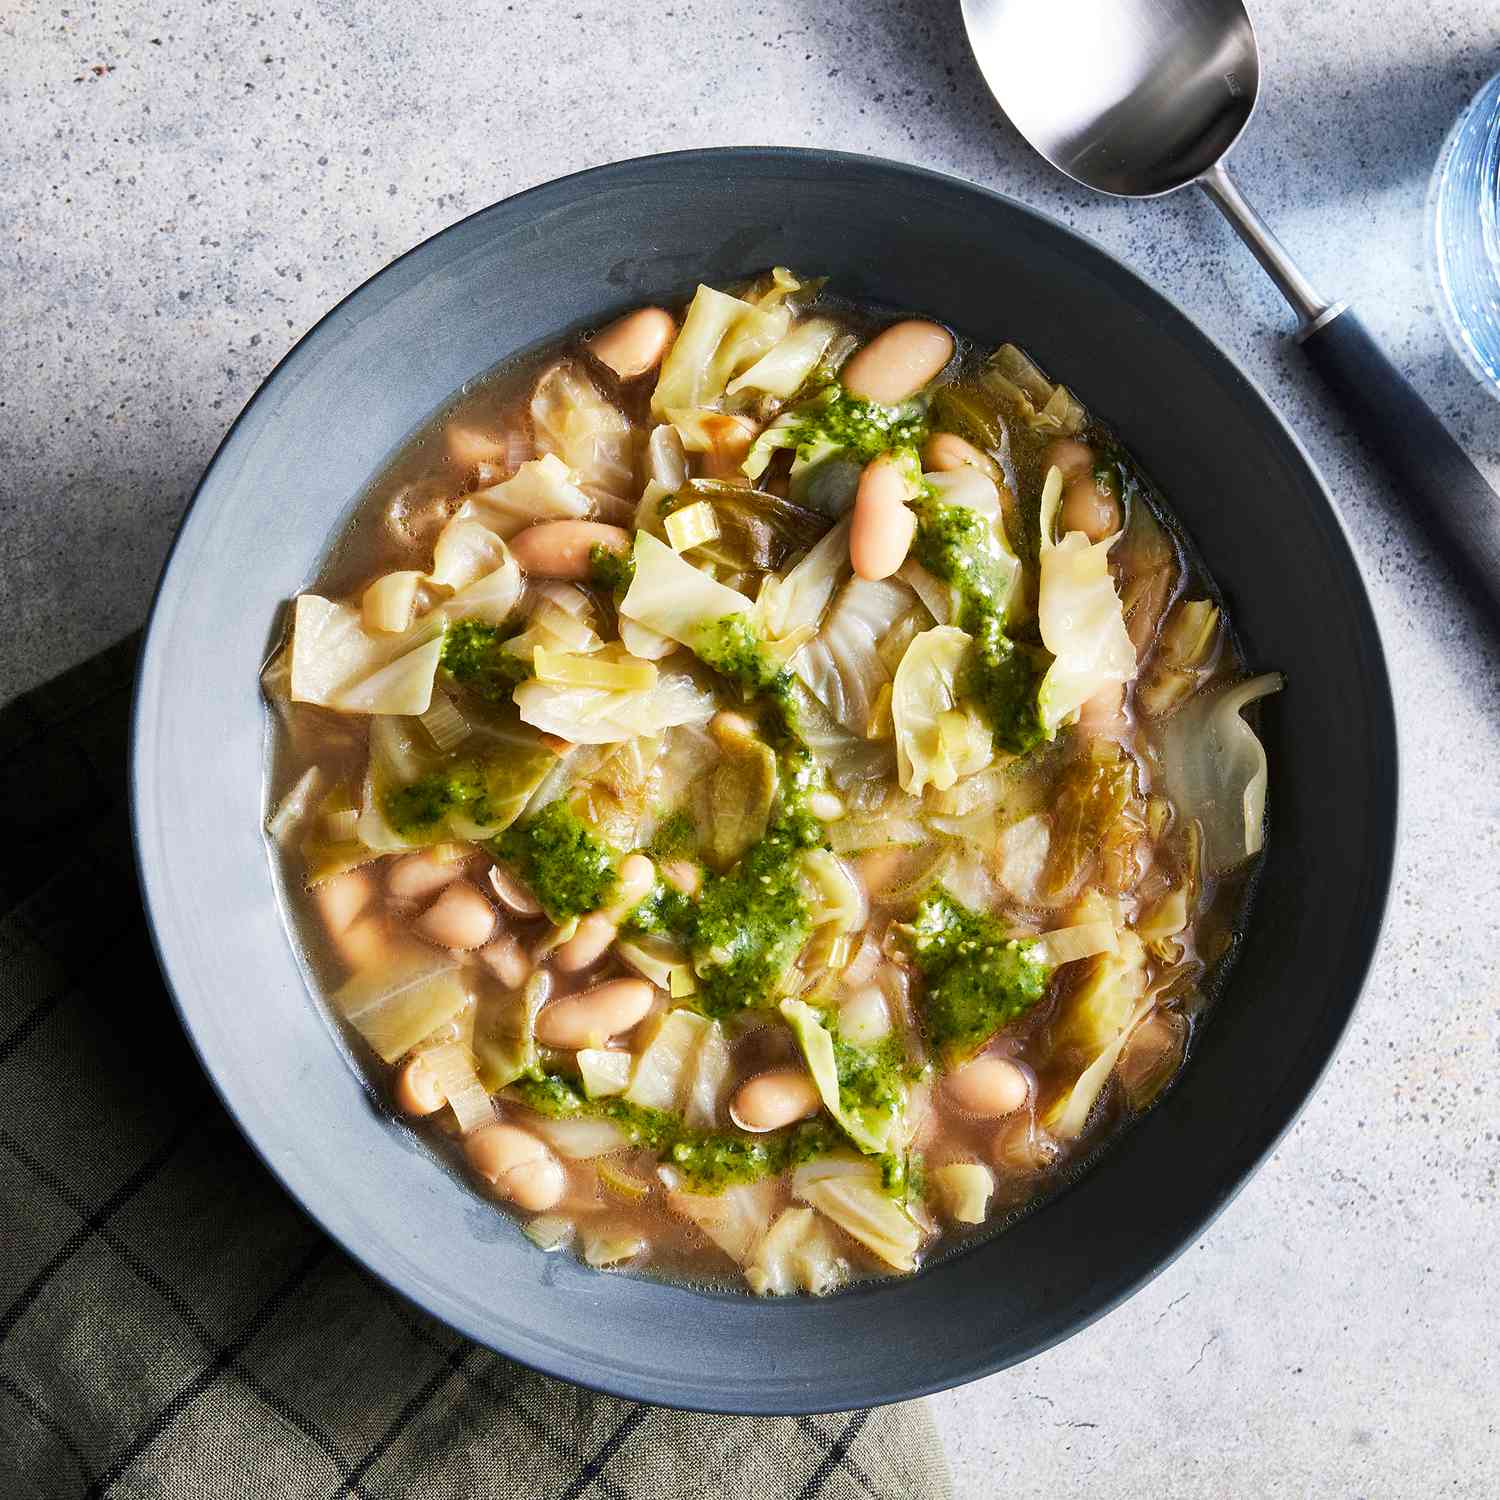 a recipe photo of the Cabbage & White Bean Soup served in a bowl